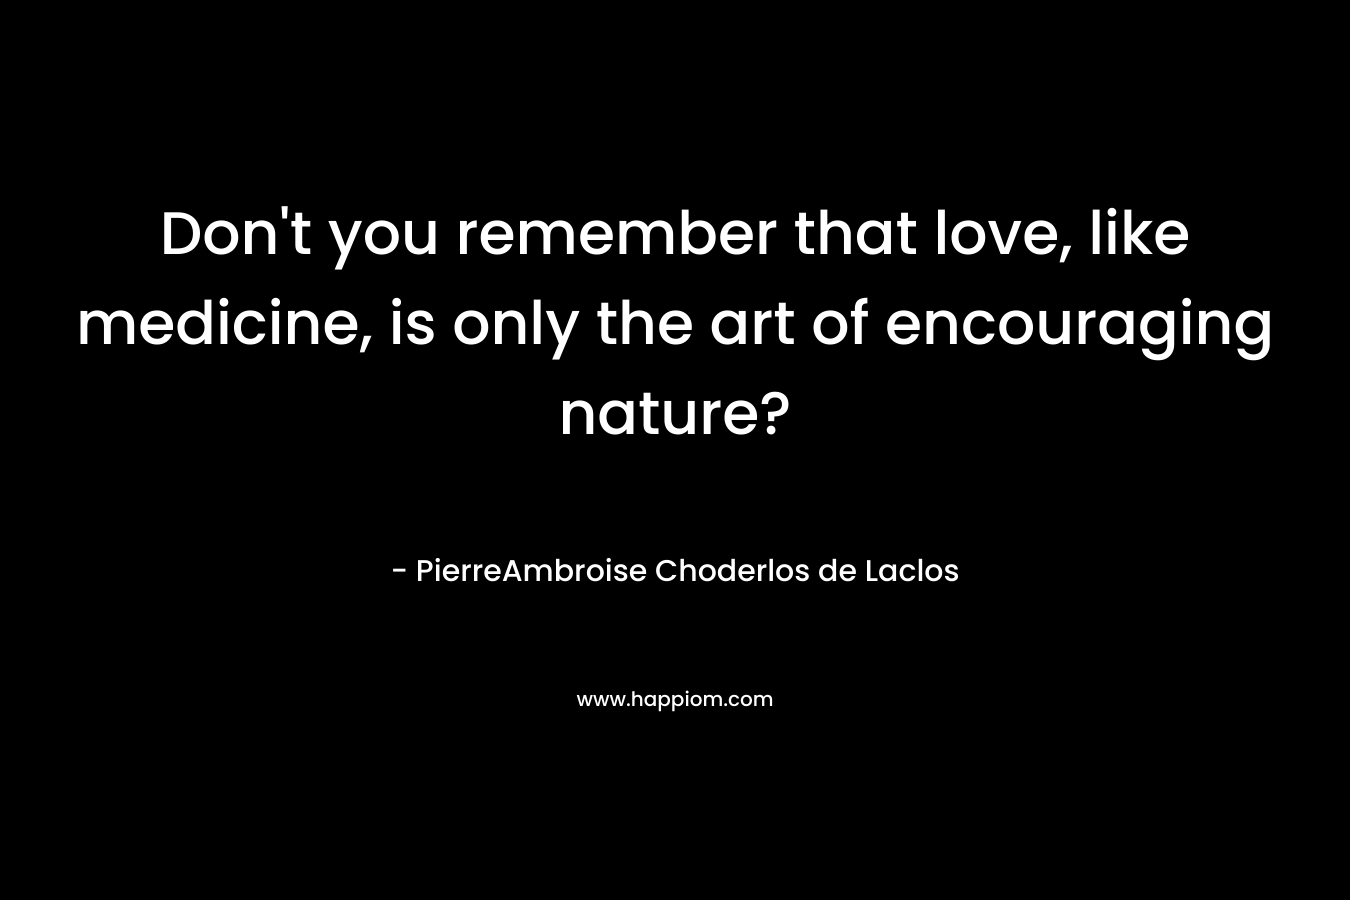 Don’t you remember that love, like medicine, is only the art of encouraging nature? – PierreAmbroise Choderlos de Laclos